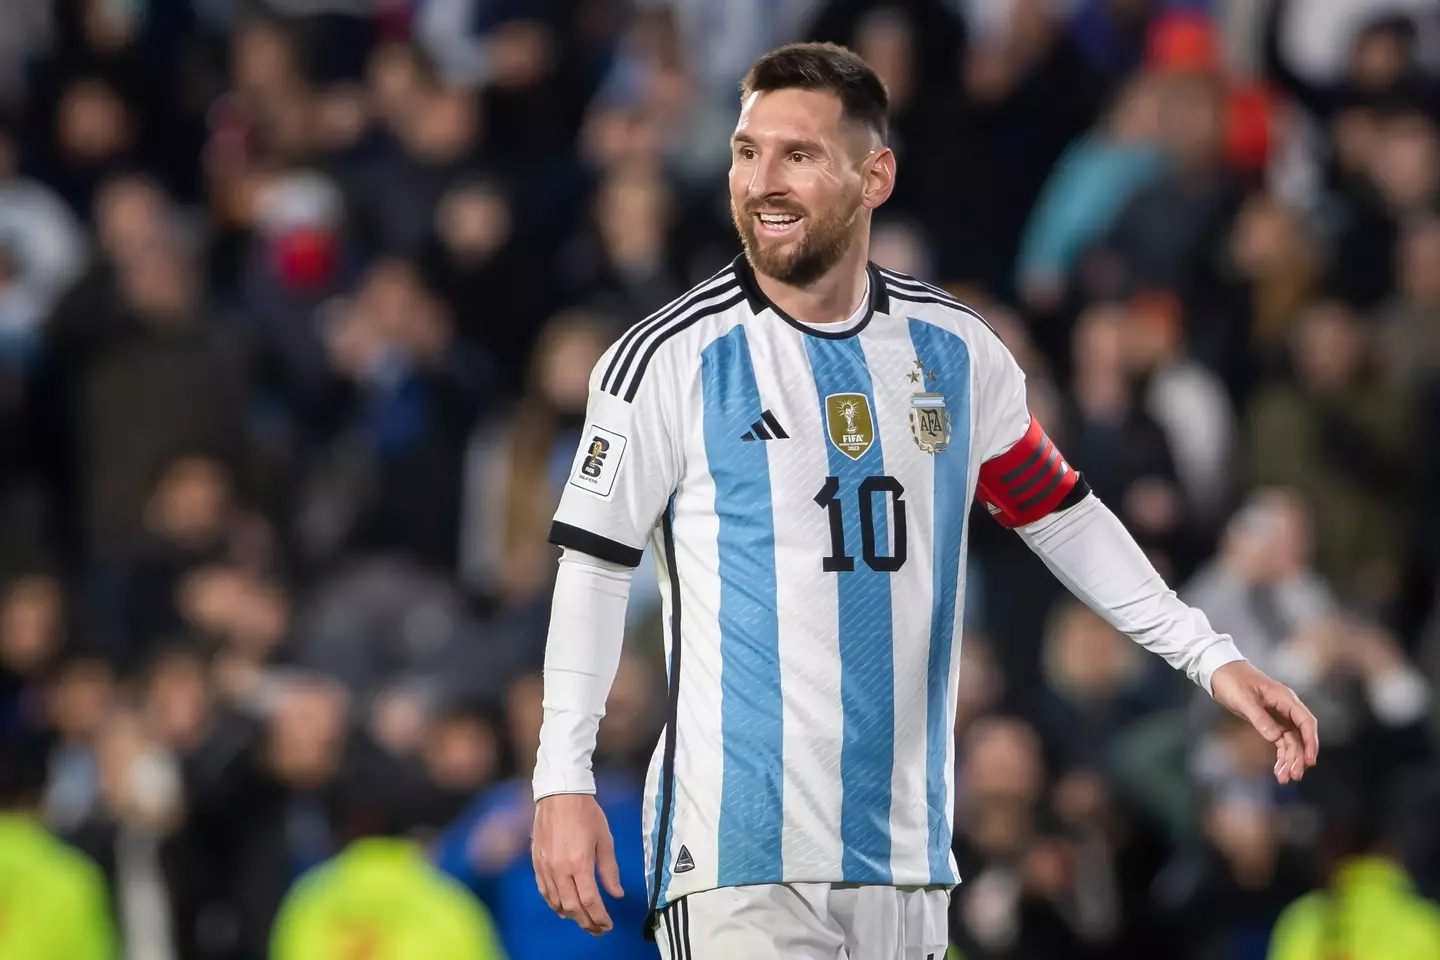 The Argentinian reportedly wants to return to his boyhood club.